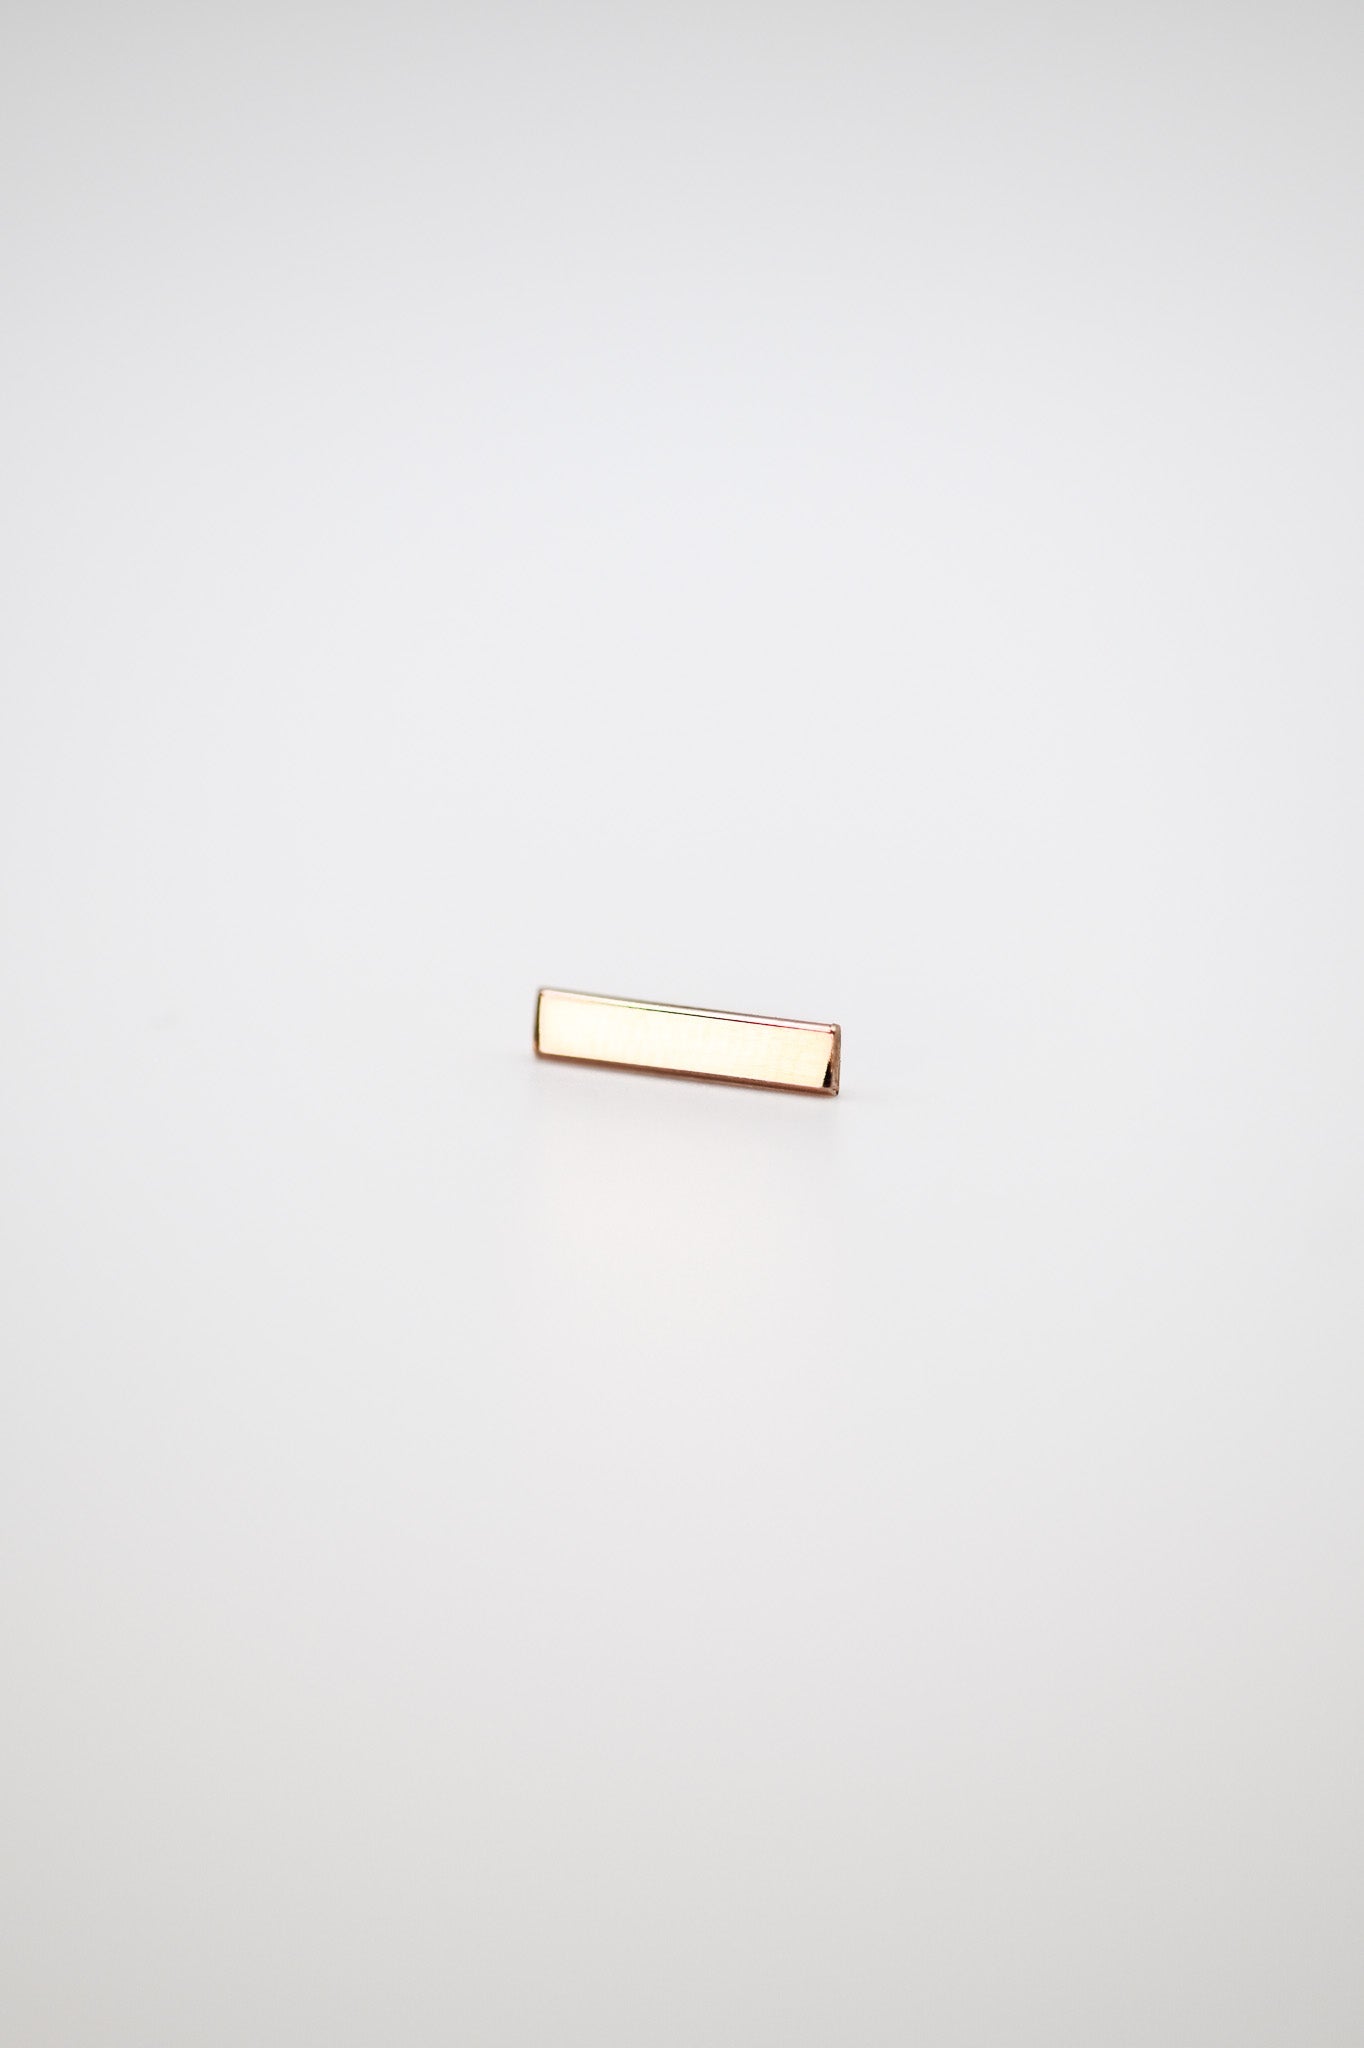 Mirror Flat Back Stud Earring, Solid Gold or Rose Gold